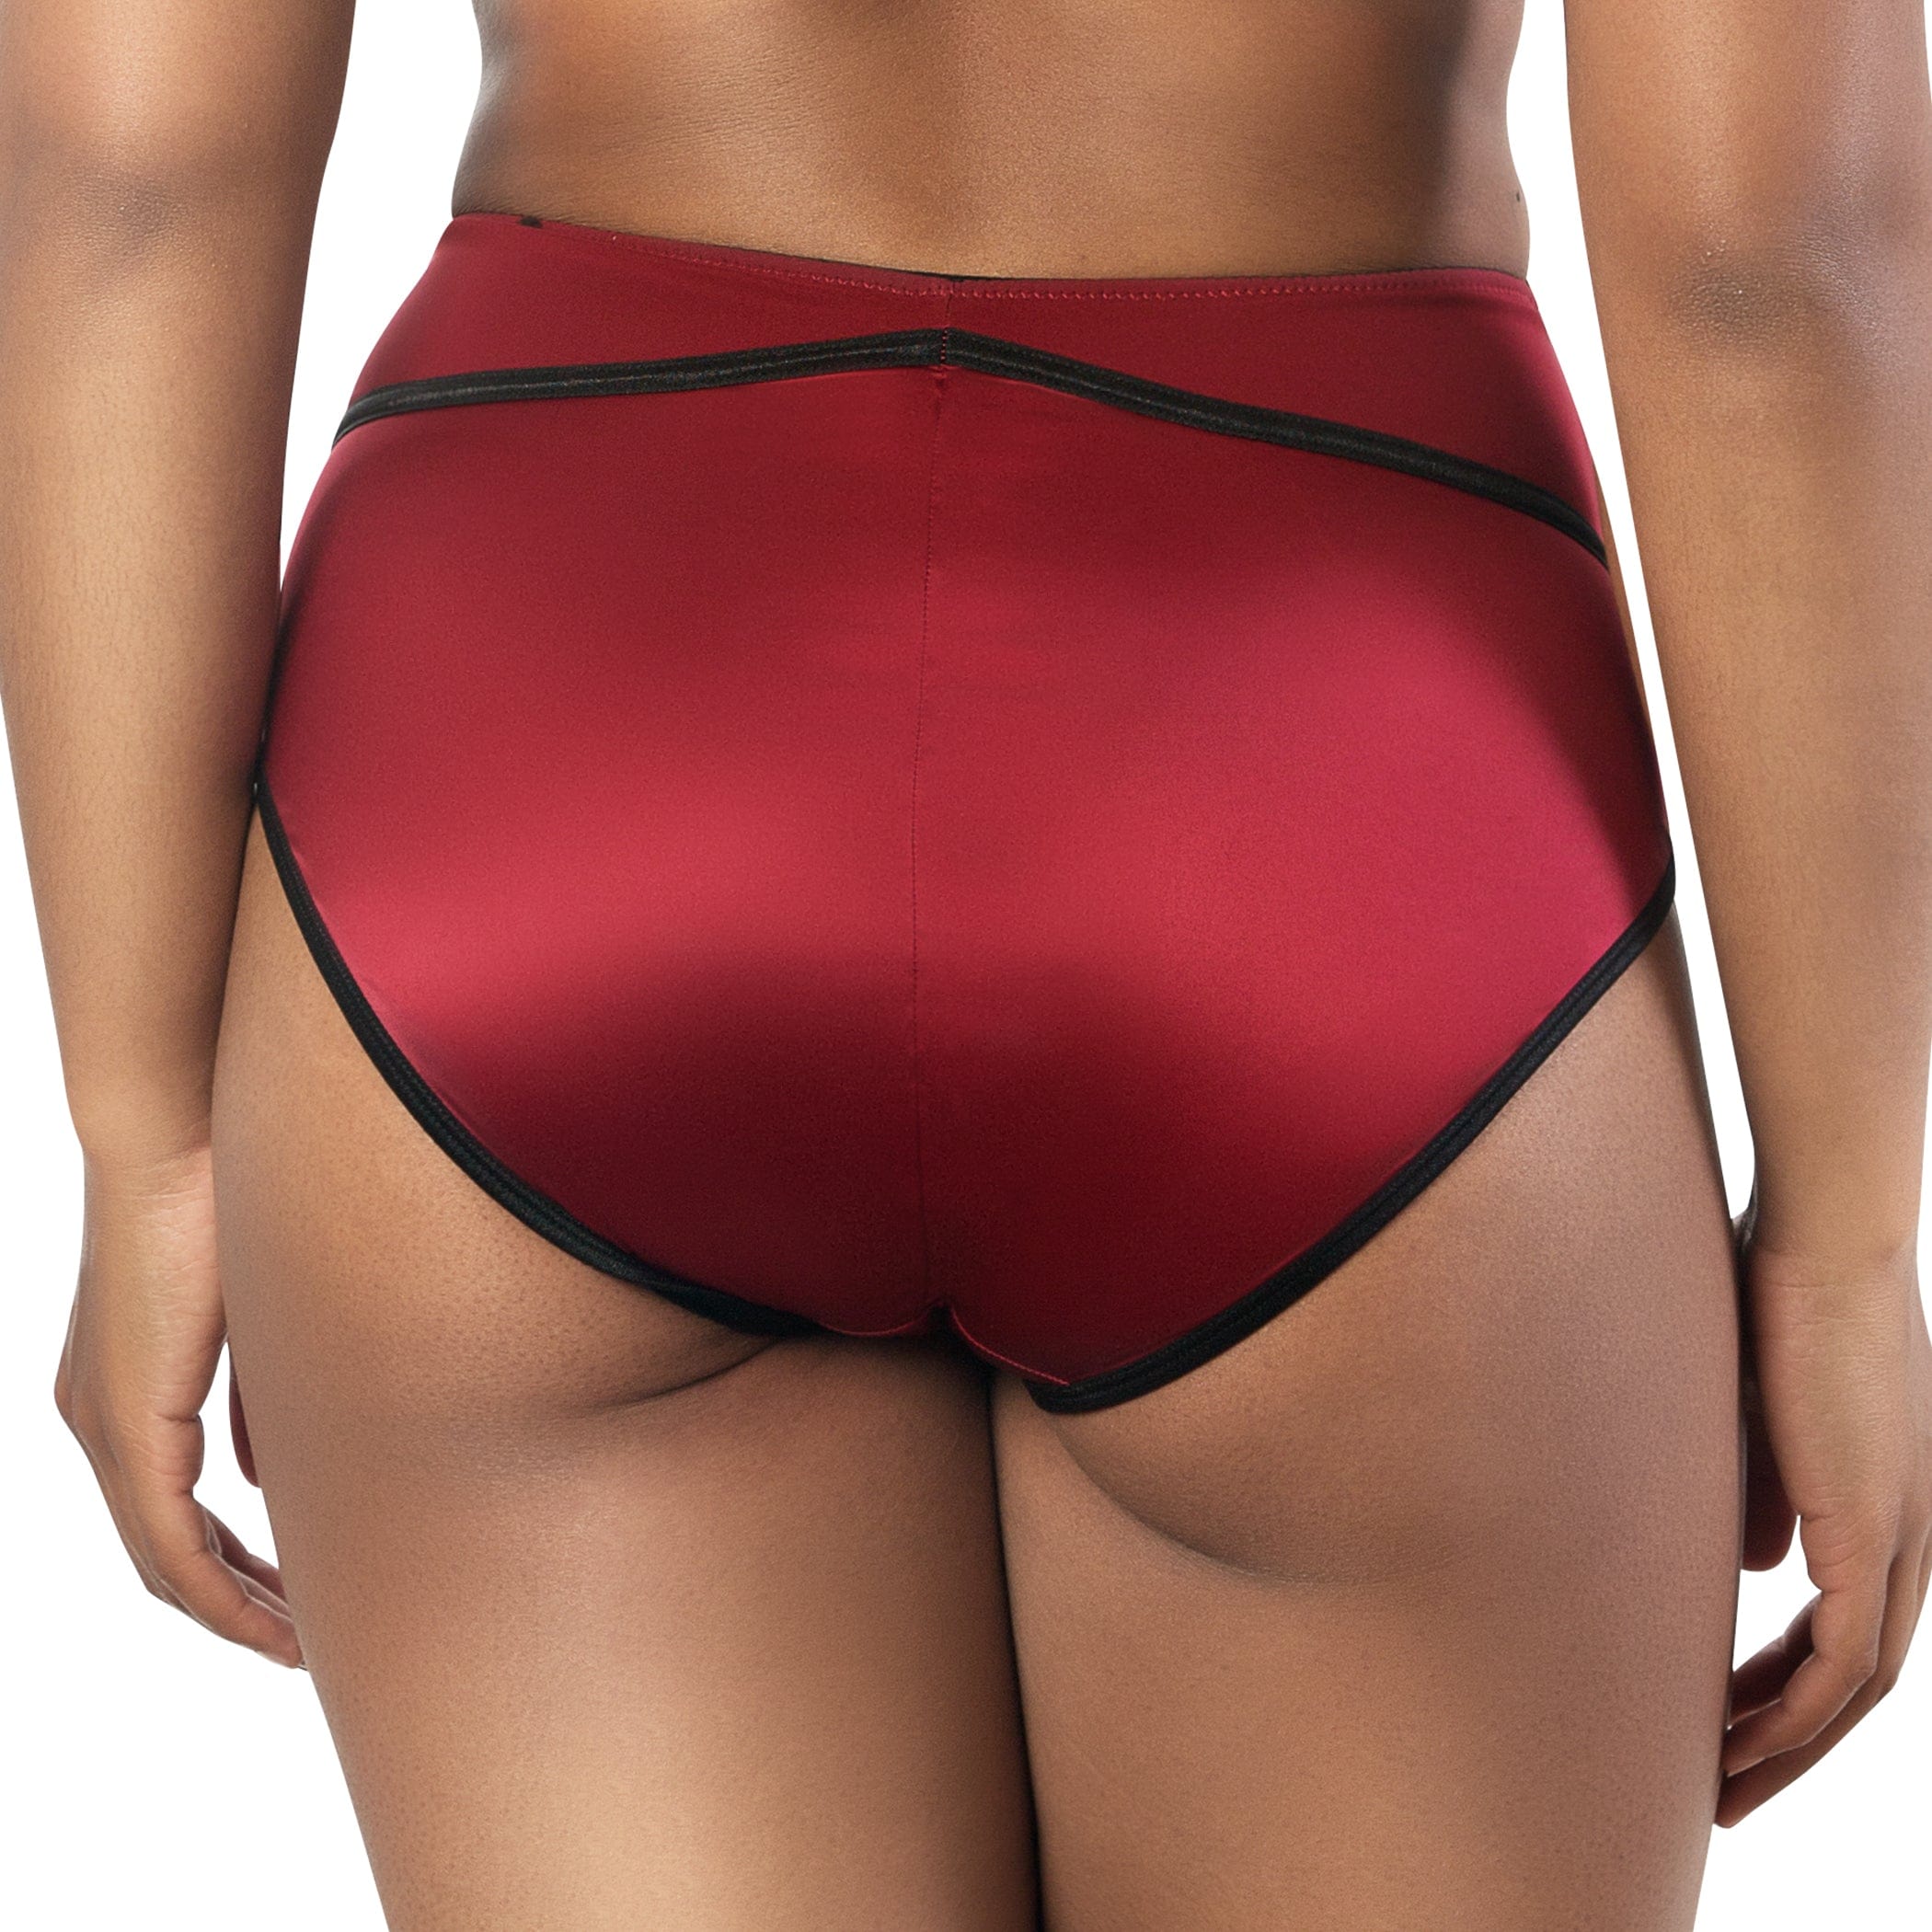 What's The Difference Between High-Waist and High-Cut Panties? -  ParfaitLingerie.com - Blog